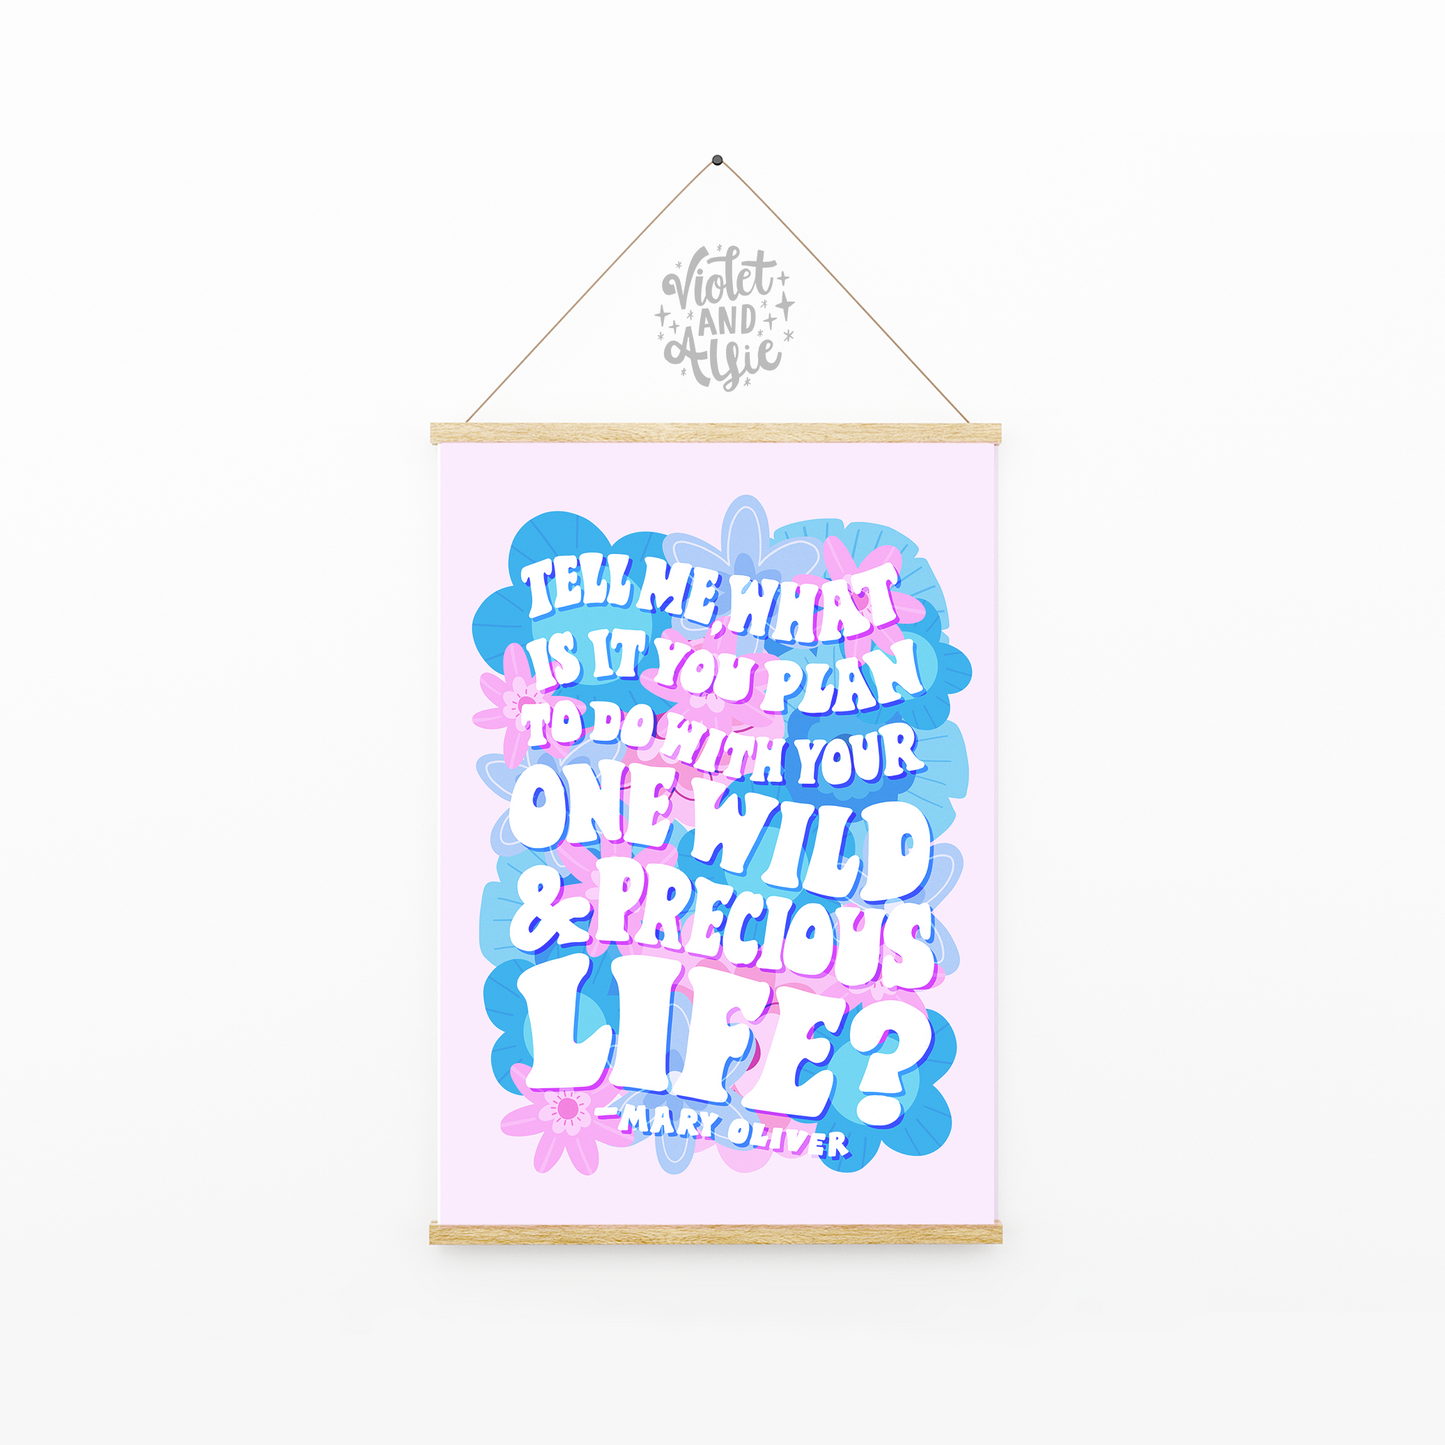 mary oliver, inspirational quote, graduation gift, school leaver gift, university gift, dorm decor, tell me what is it you plan to do with your one wild and precious life, modern boho art, flower power print, retro hippy boho style, pink and blue decor, pastel aesthetic